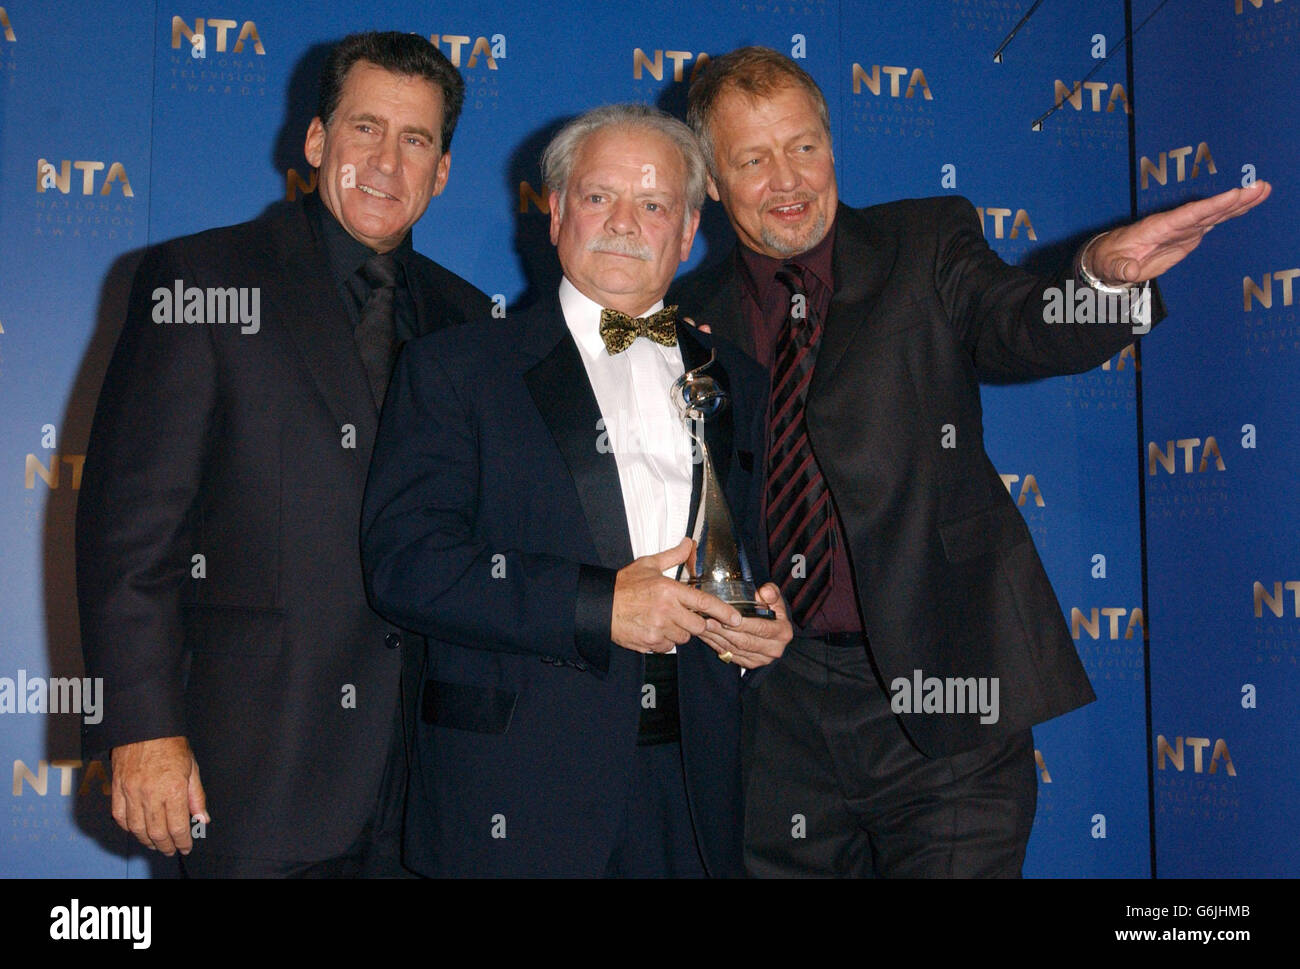 Actor David Jason with his award for Most Popular Drama for Touch of Frost during the annual National Television Awards at the Royal Albert Hall in central London. With him are Starsky and Hutch actors Paul Michael Glaser (left) and David Soul. Stock Photo